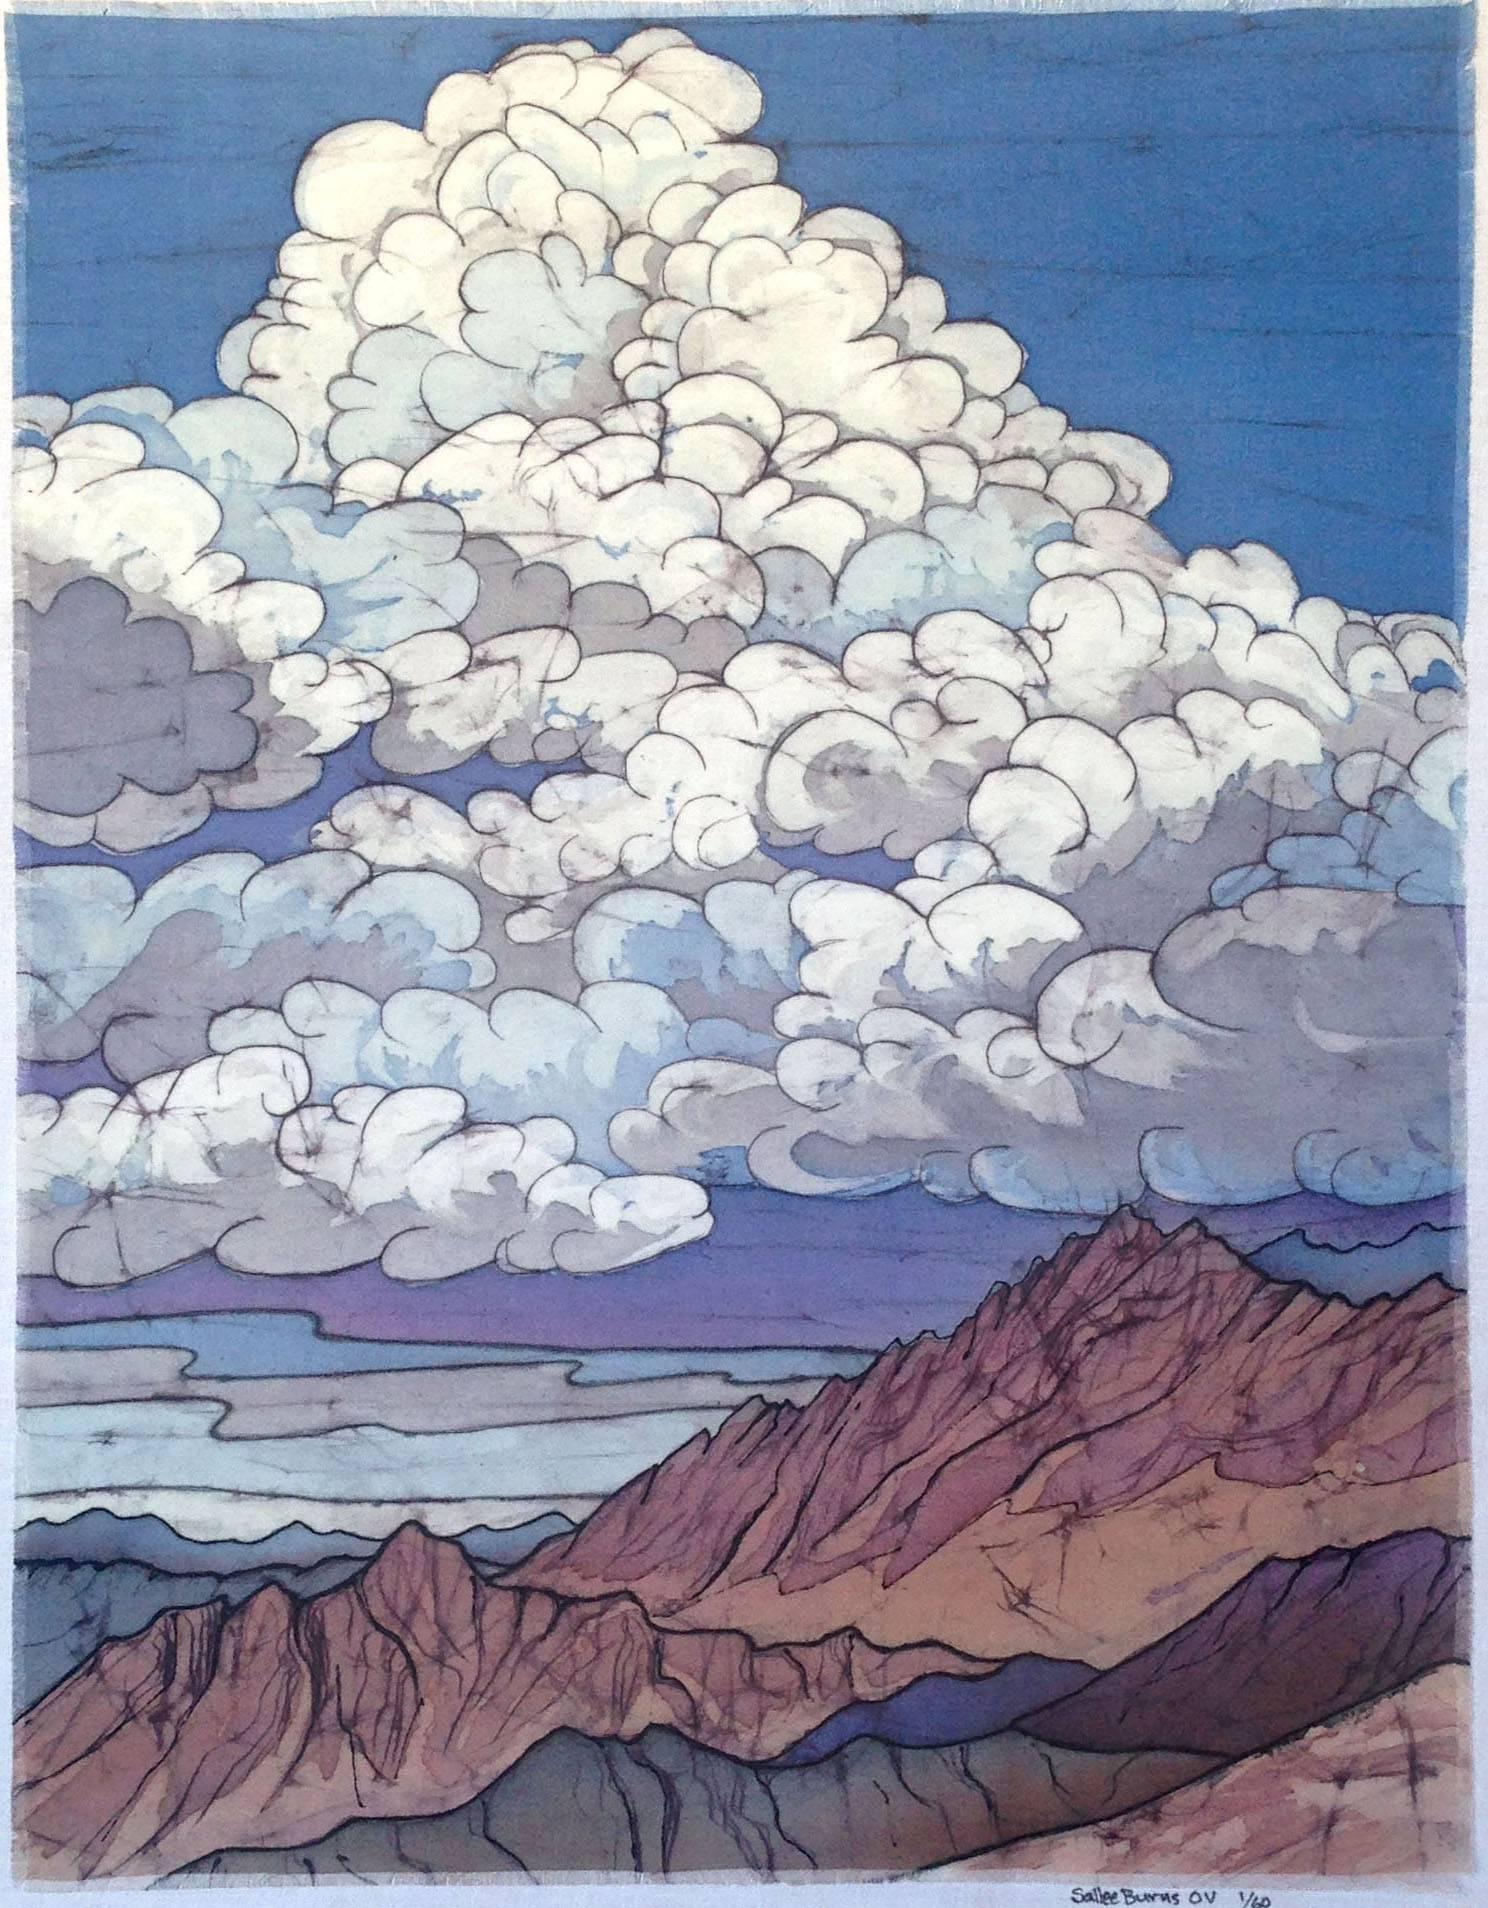 Clouds Over the Mountains Landscape - Print by Sallee Burns